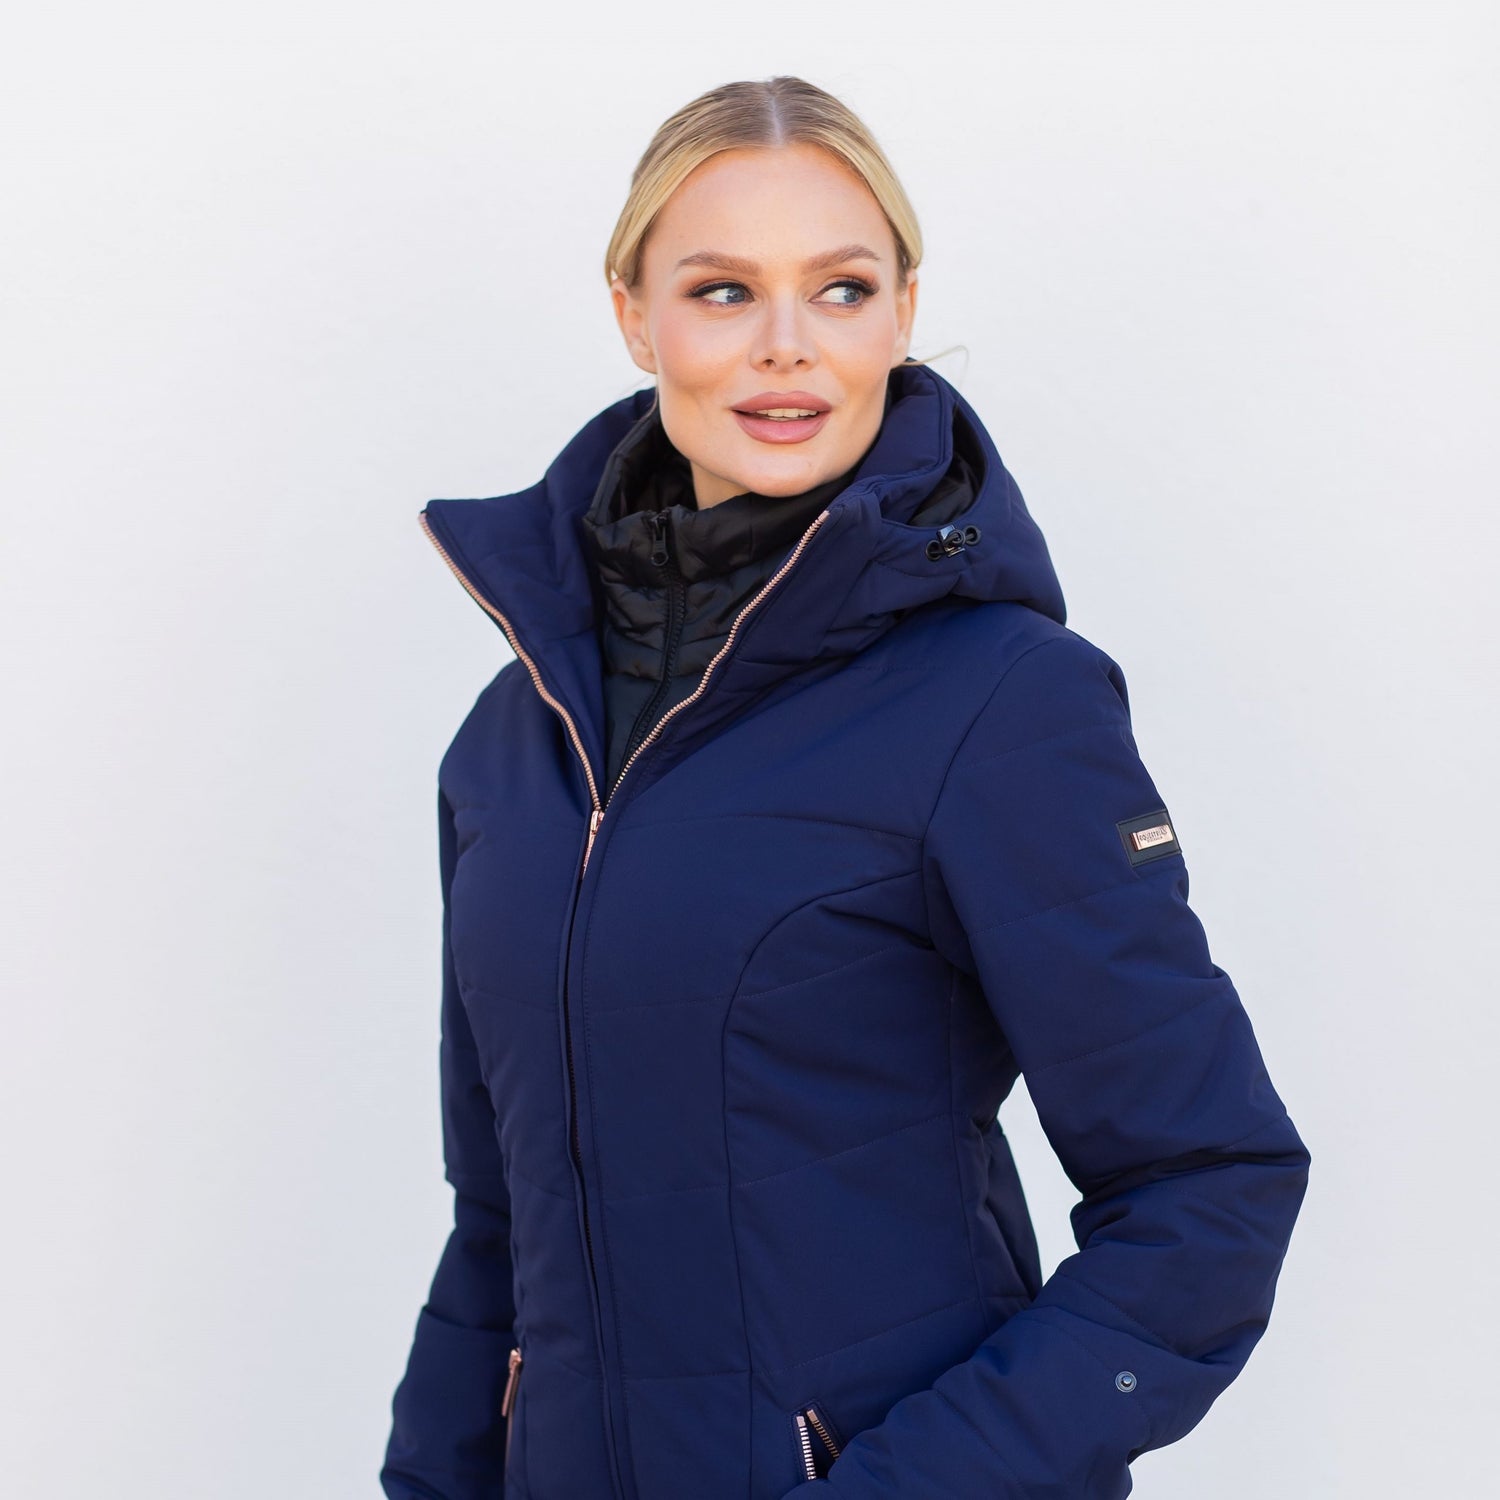 Layer Up for the Winter with Equestrian Stockholm